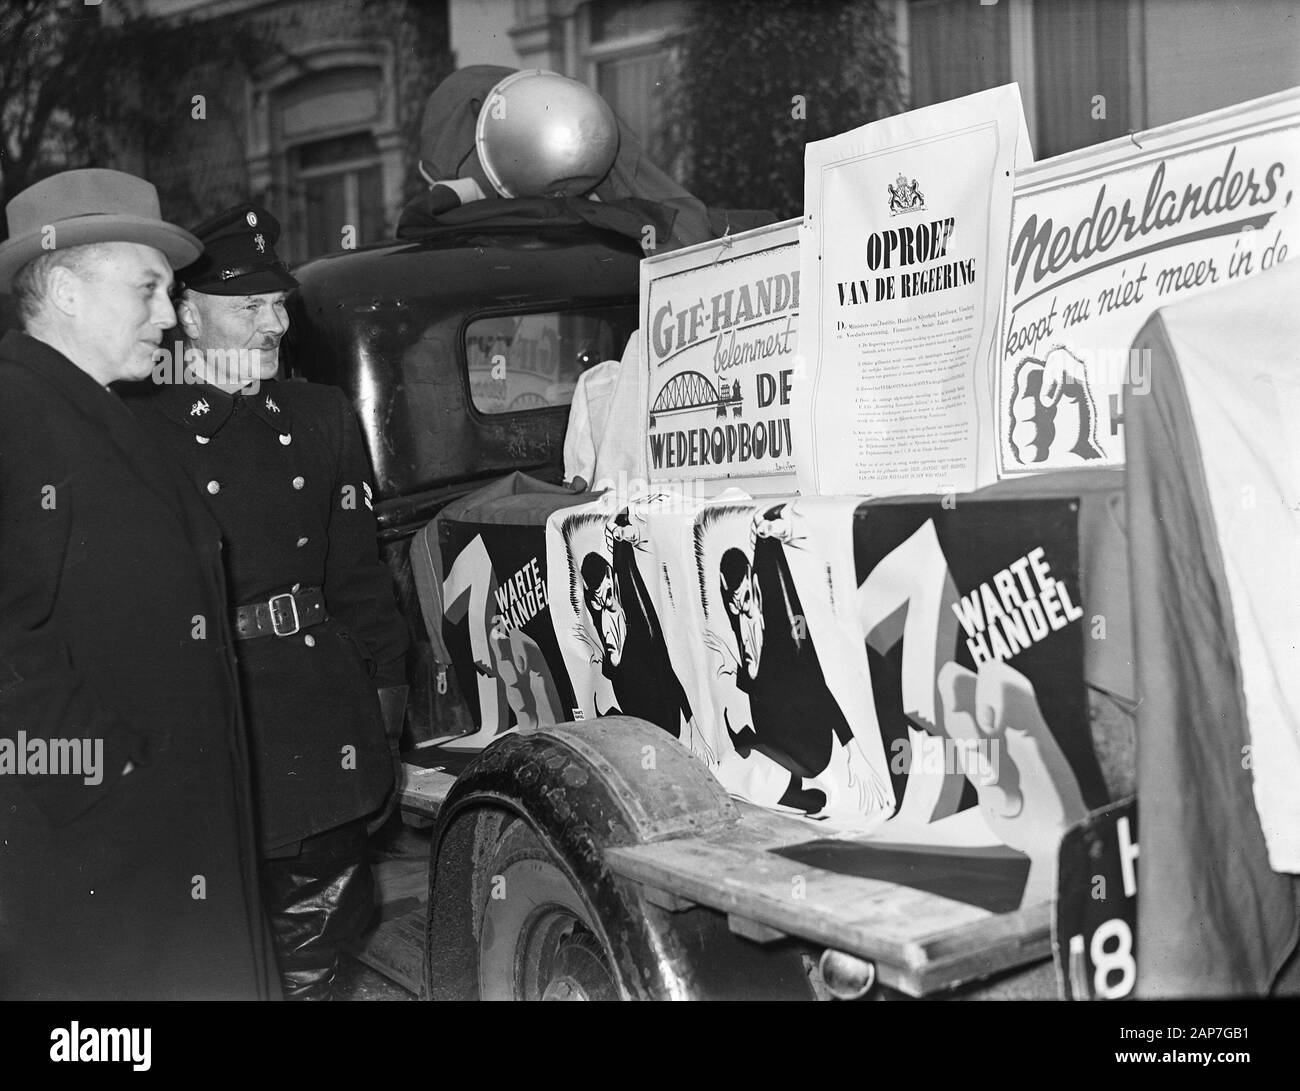 Action against black trade. Truck with posters Date: 22 November 1945 Keywords: actions, posters, crime, trade, advertising, vehicles Stock Photo